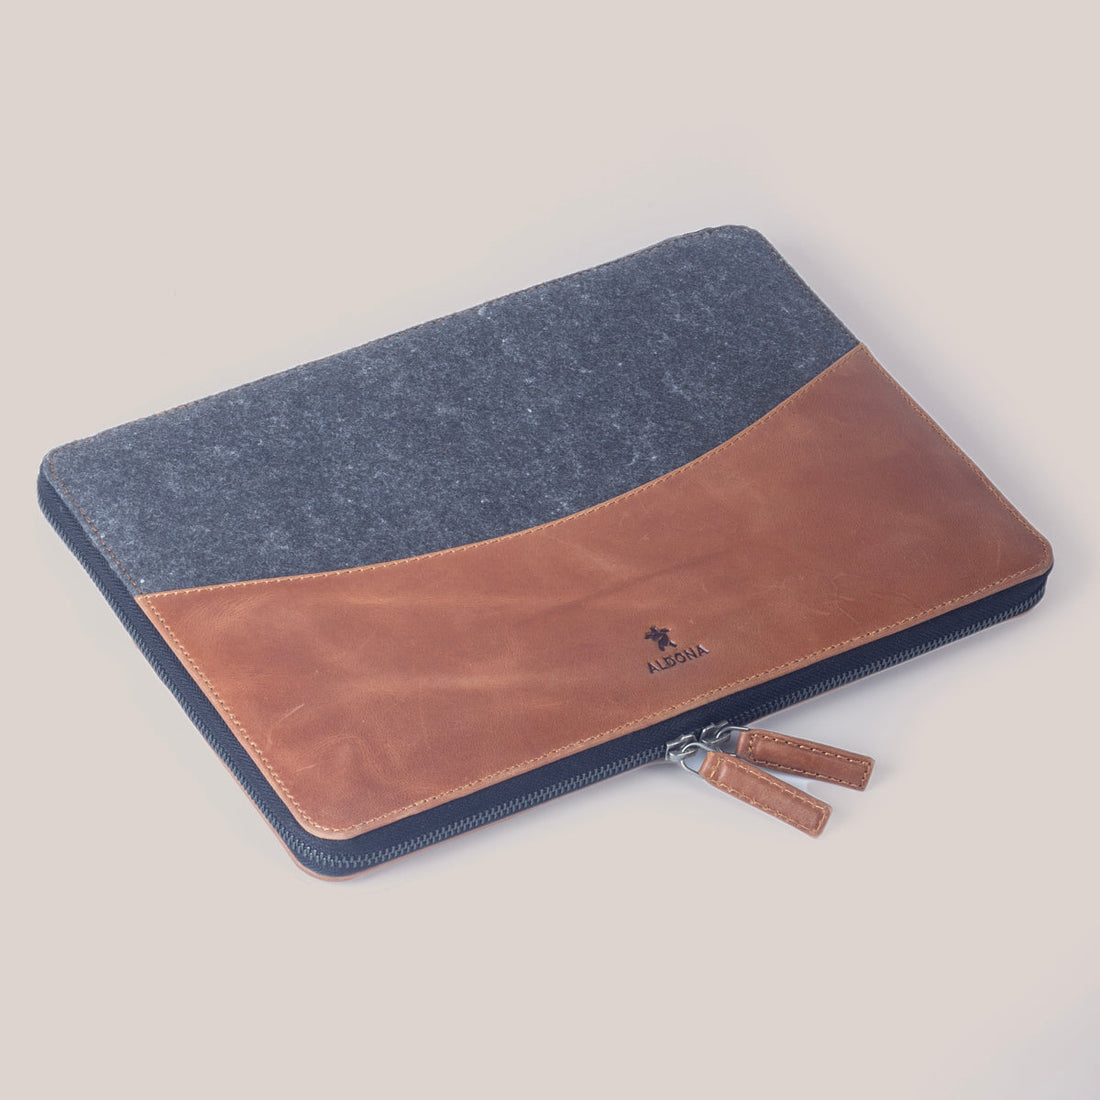 DELL XPS Zippered Laptop Case - Burnt Tobacco